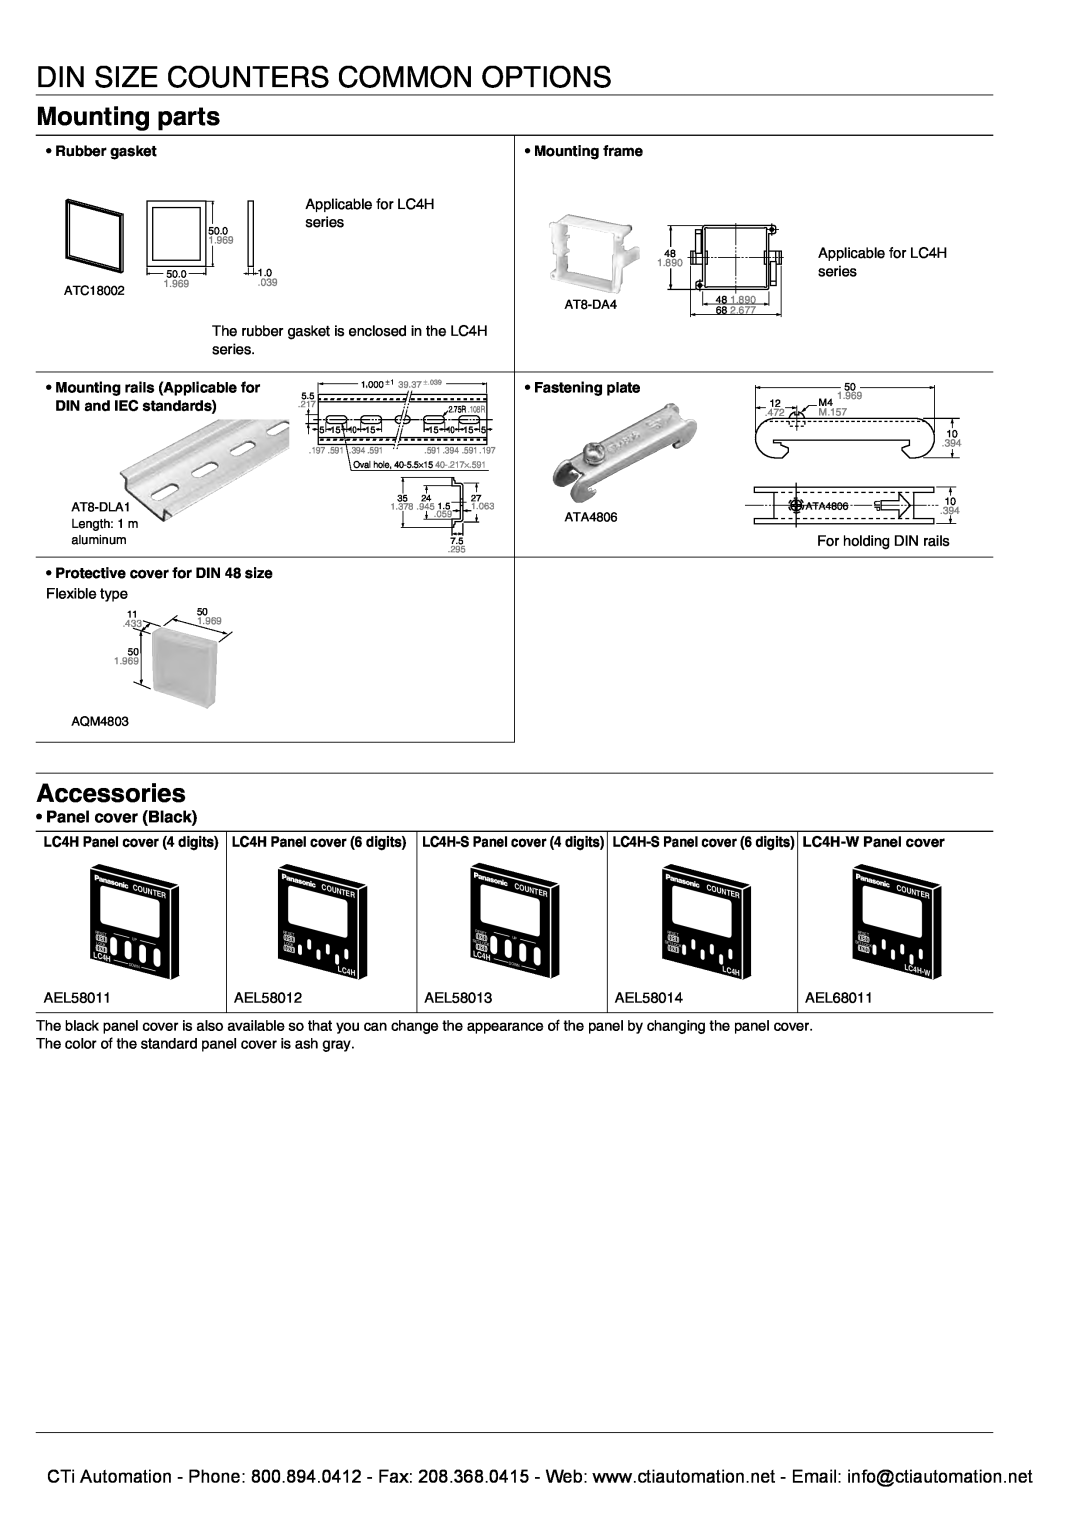 Panasonic LC2H Din Size Counters Common Options, Mounting parts, Accessories, Panel cover Black, Mounting frame 